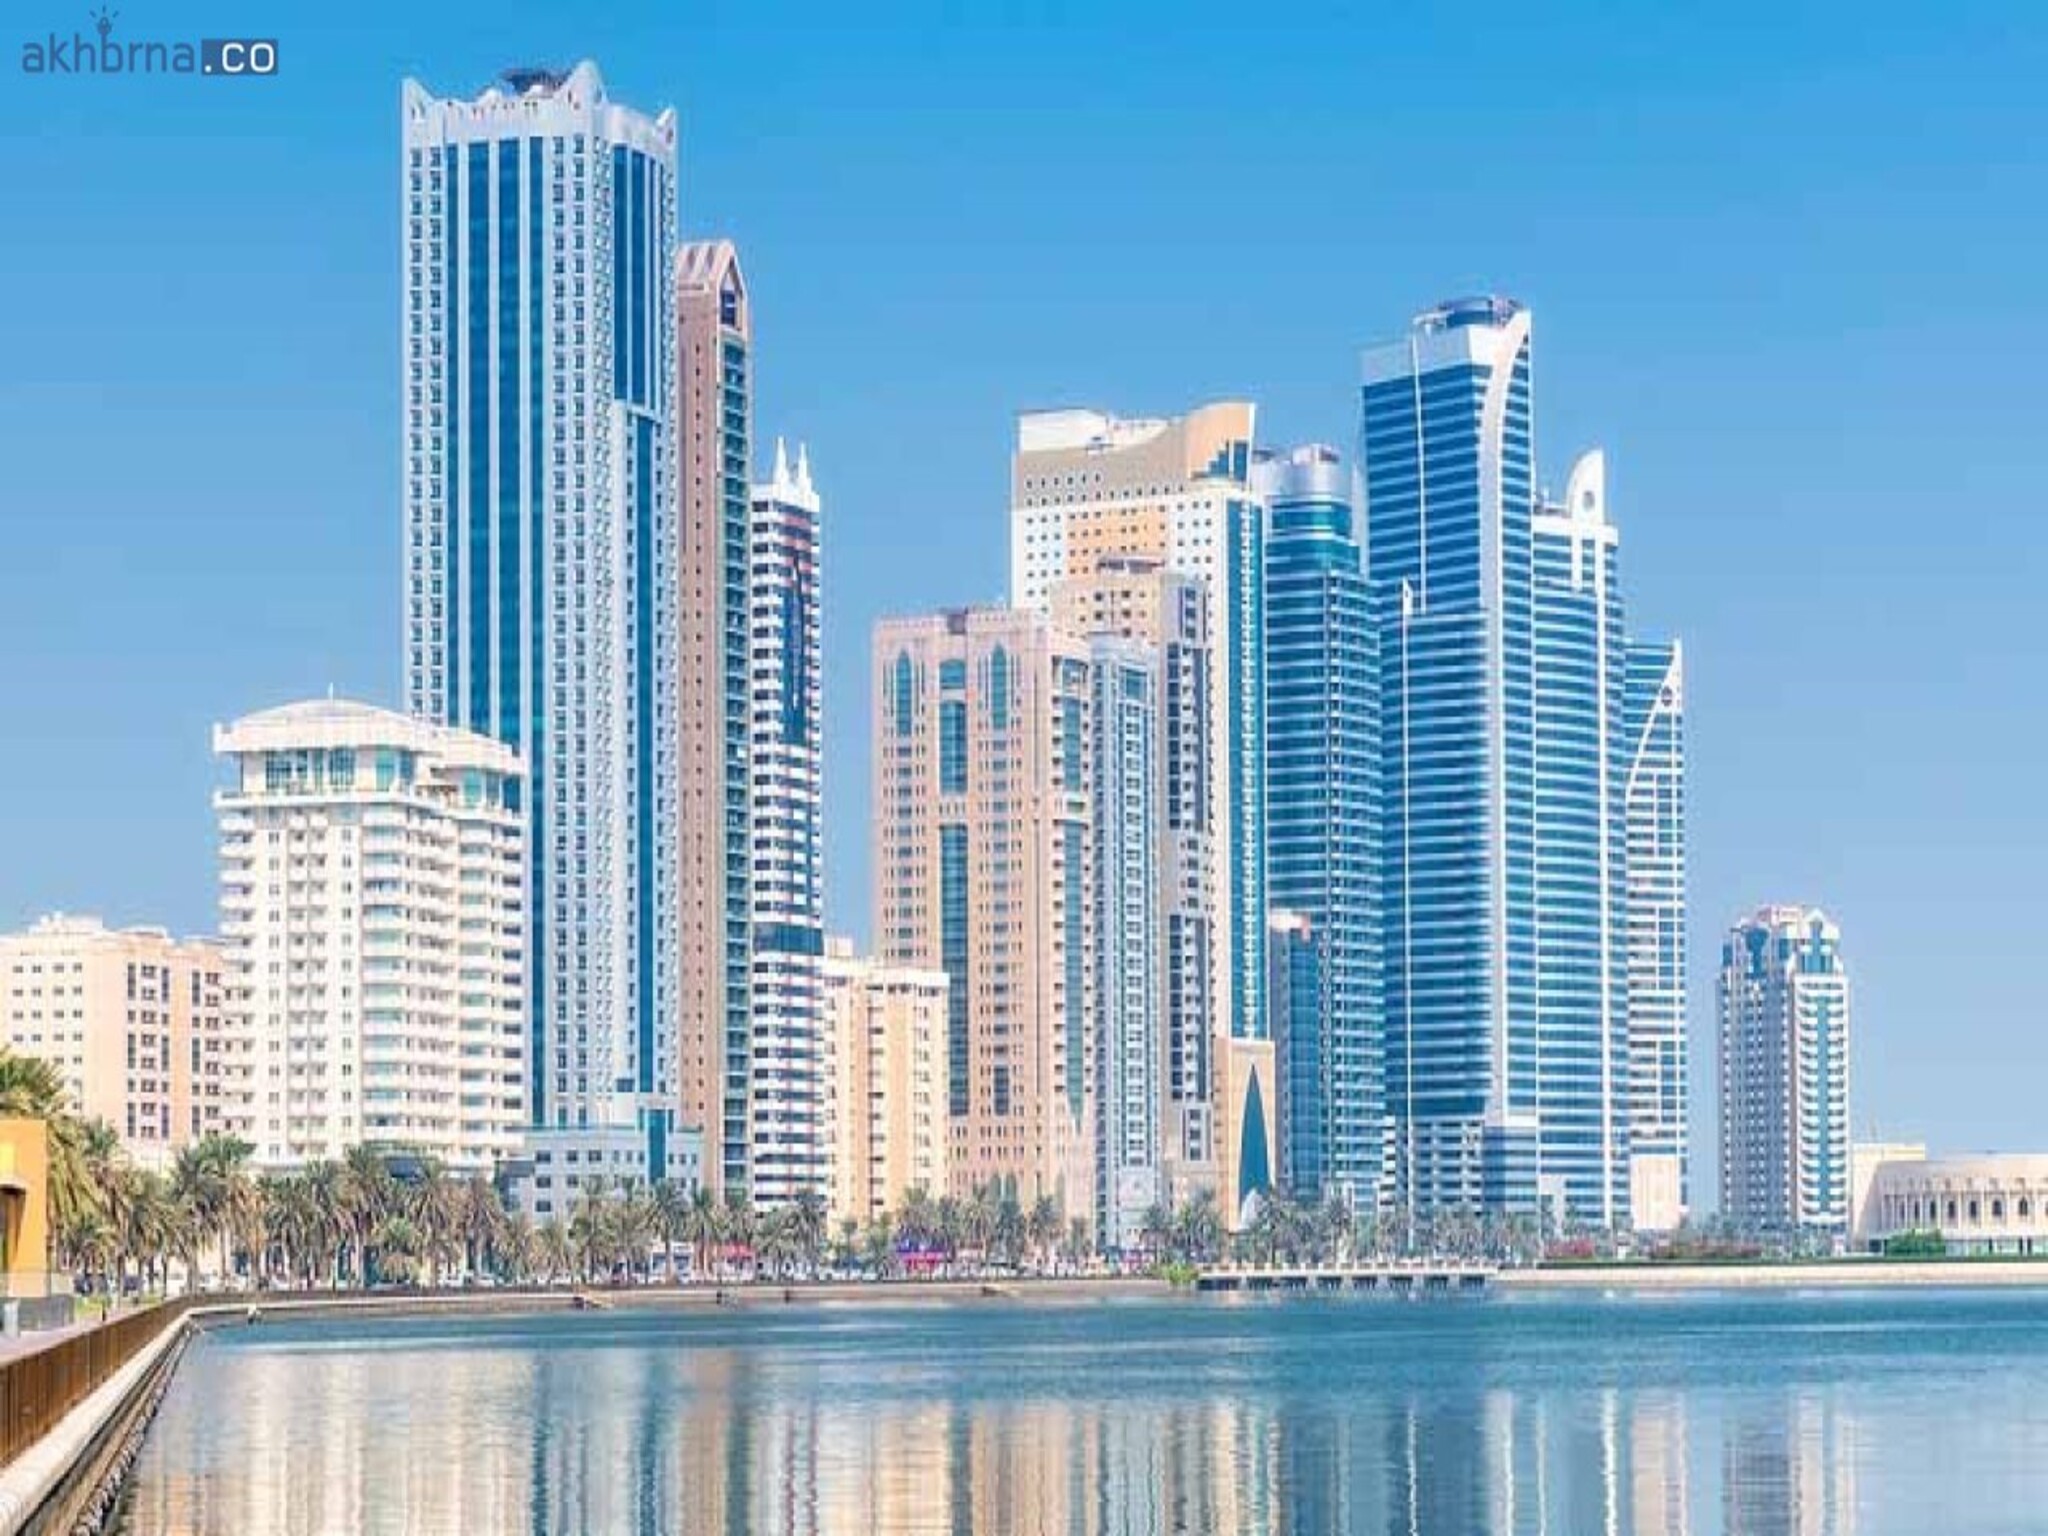 UAE introduces 5 Sharjah Buildings Fire-Proofed in Dh100m Government Initiative